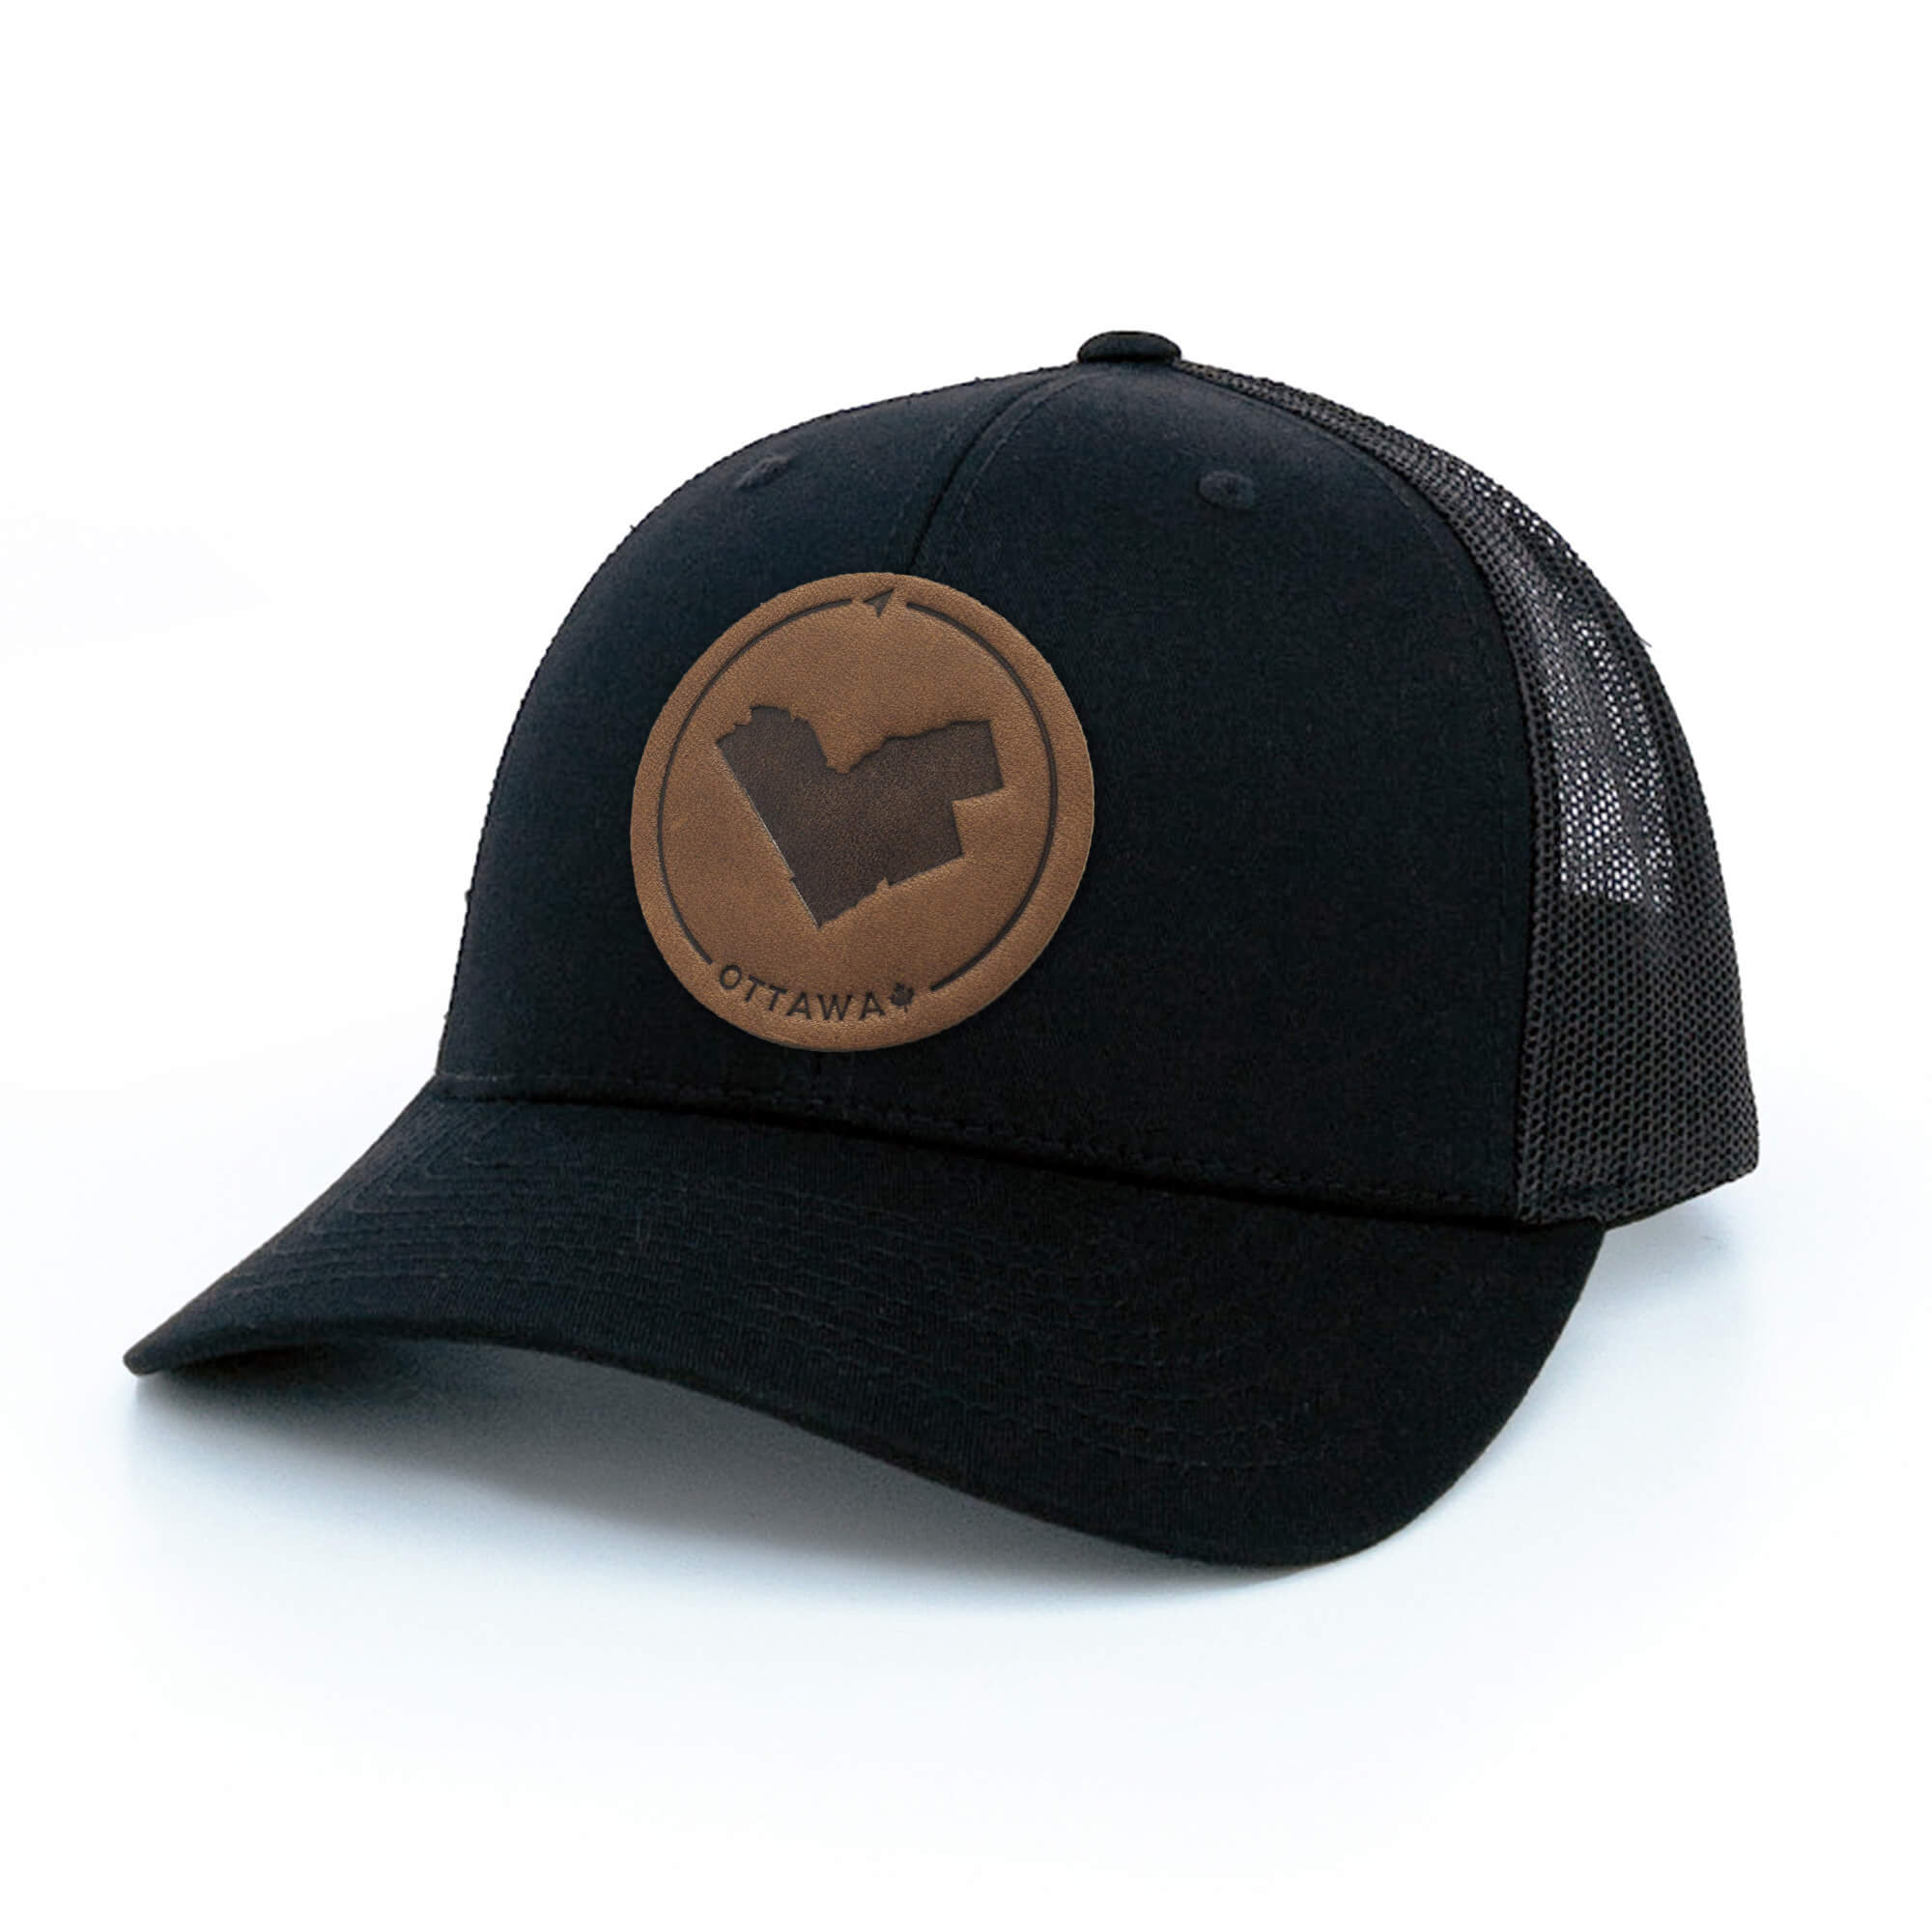 Black trucker hat with full-grain leather patch of Ottawa | BLACK-002-007, CHARC-002-007, NAVY-002-007, HGREY-002-007, MOSS-002-007, BROWN-002-007